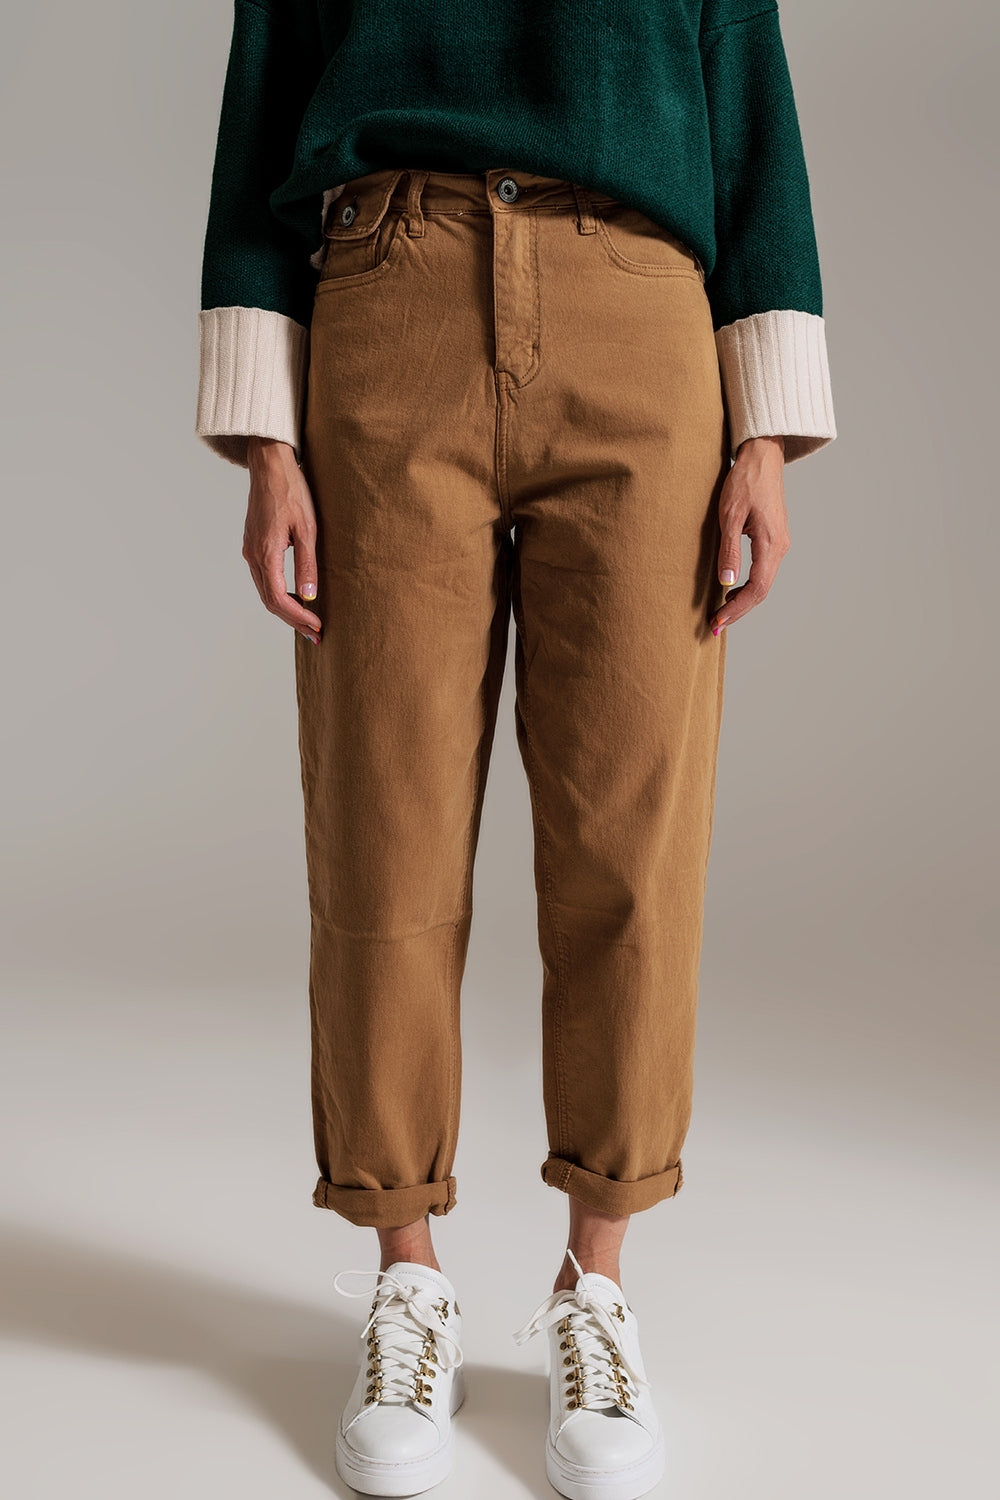 Q2 Camel relaxed pants with pocket detail at the waist